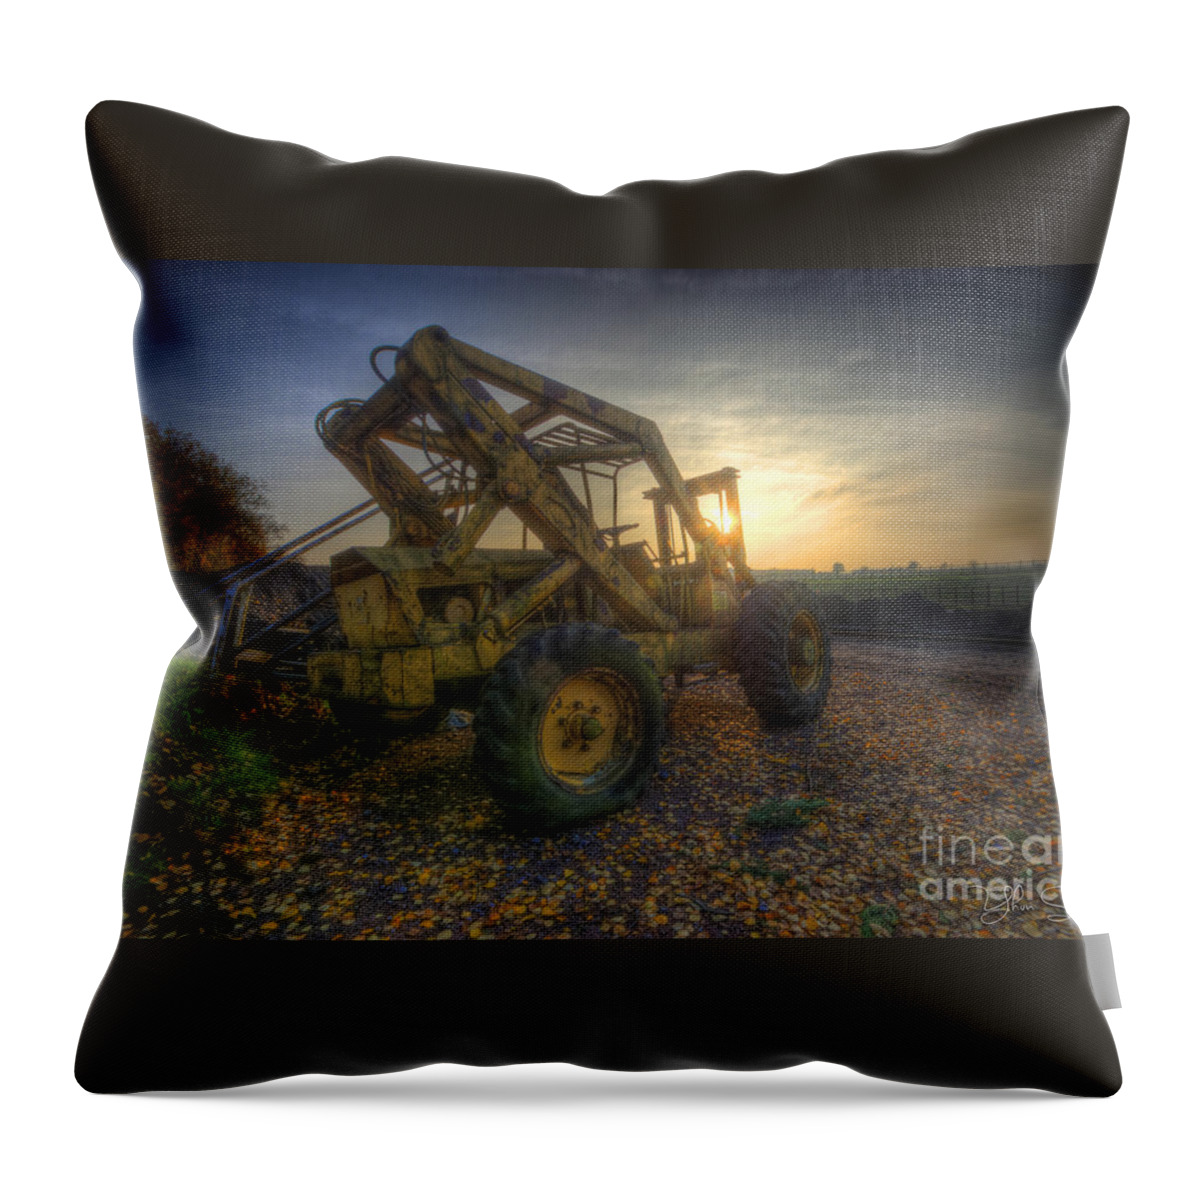 Art Throw Pillow featuring the photograph Oldskool Forklift by Yhun Suarez